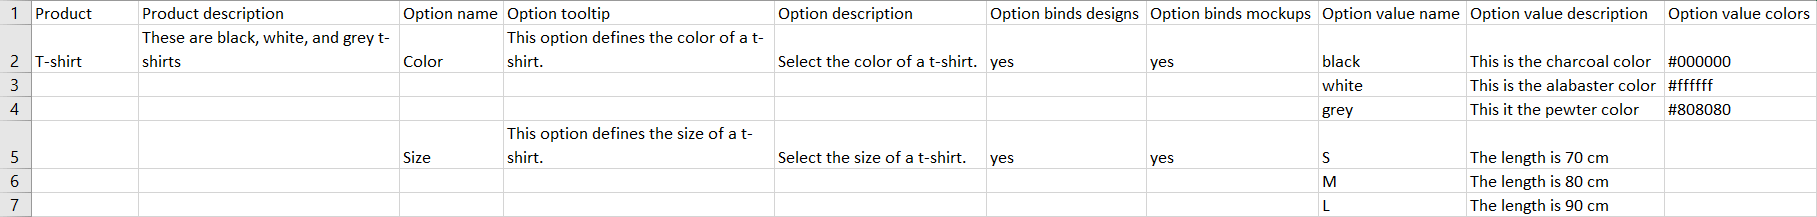 Add the option value tooltip, the option value description, and the option value color to each option value.